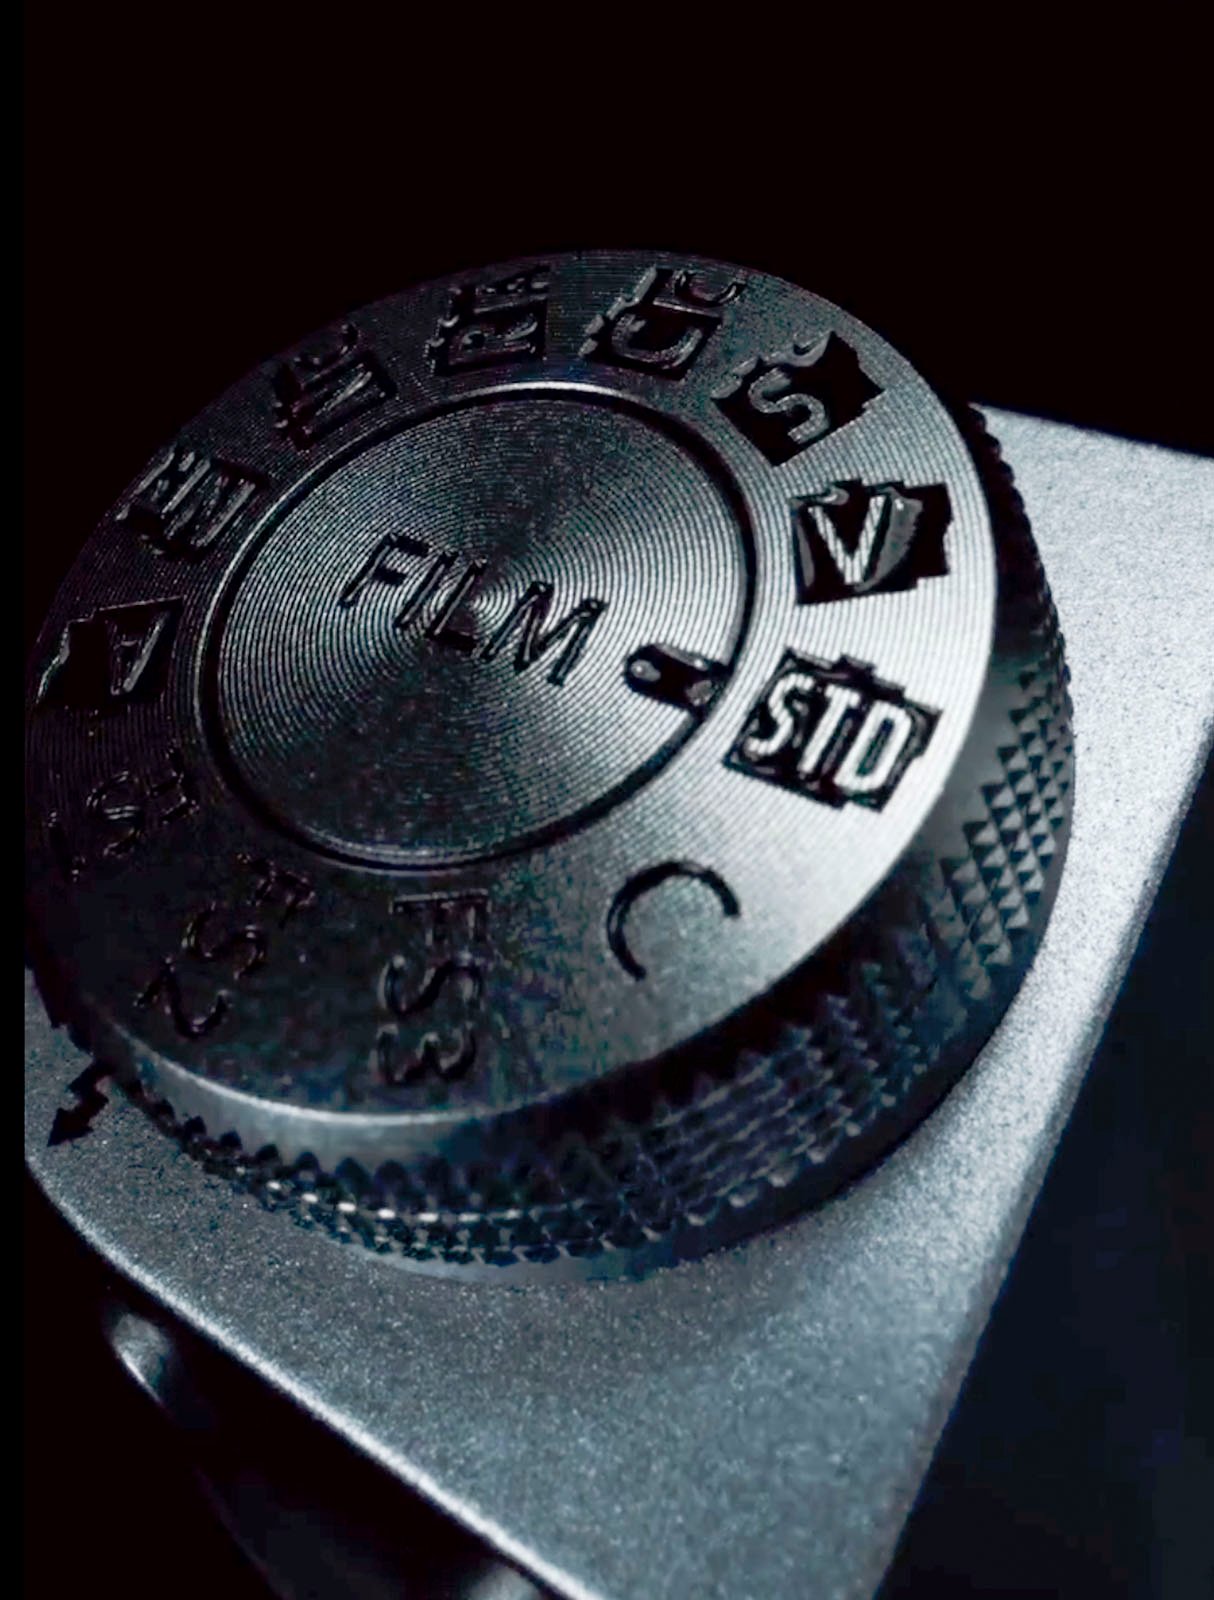 Close-up of a camera mode dial showing various settings such as auto, manual, and video, set against a black background.